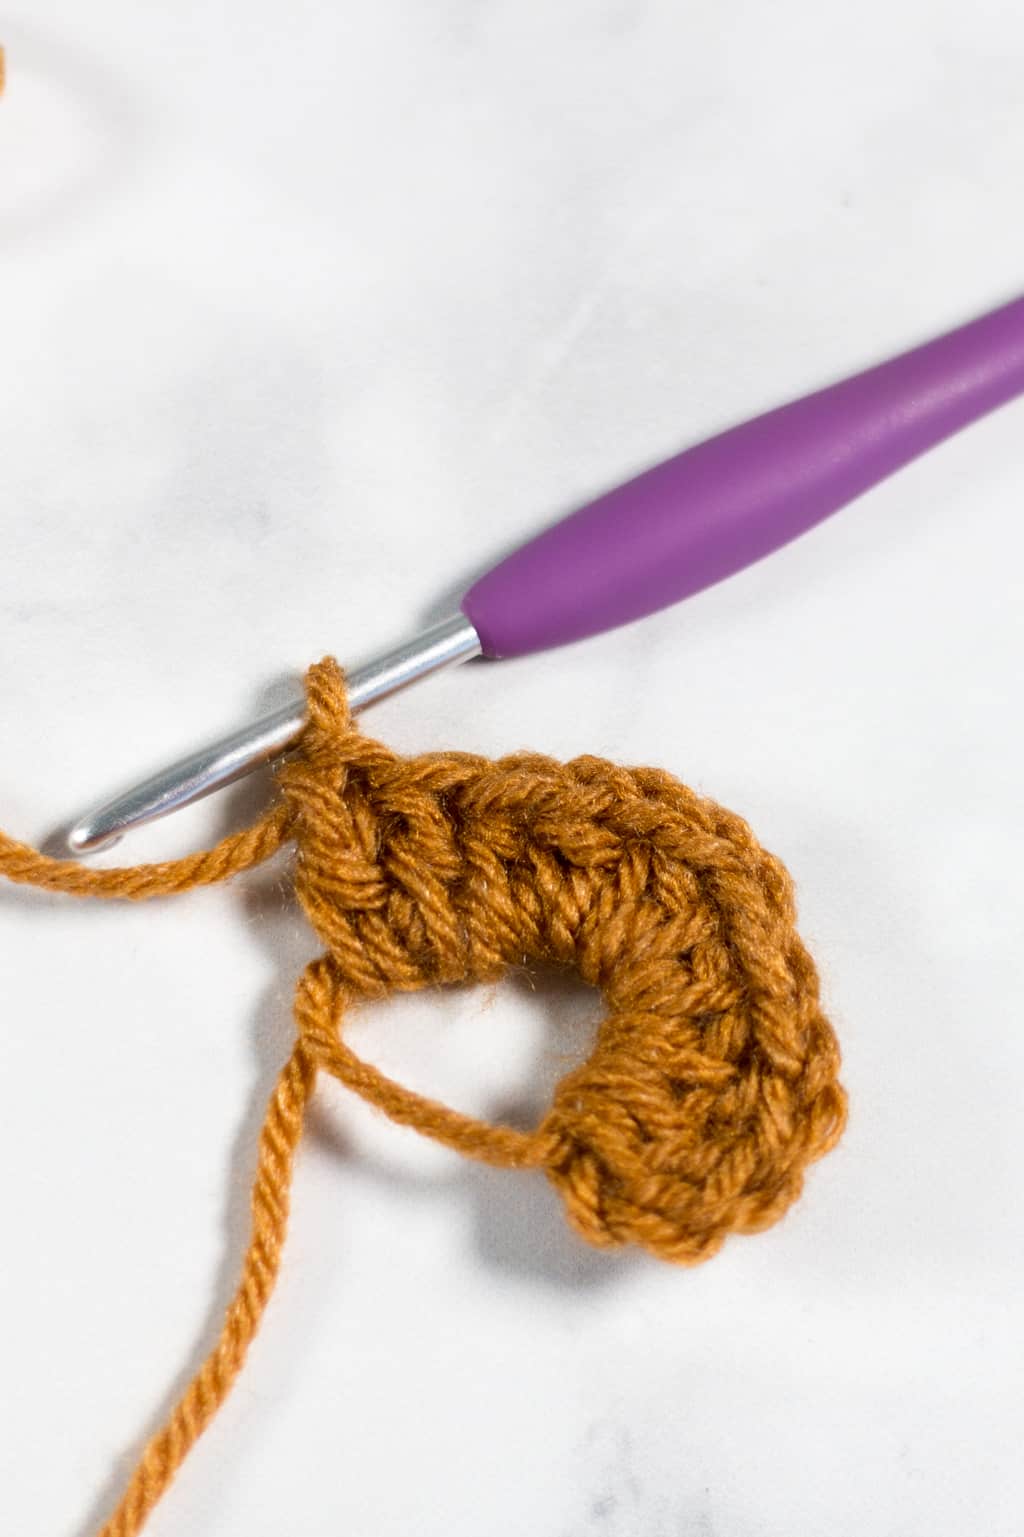 Double Crocheting into a Magic Ring